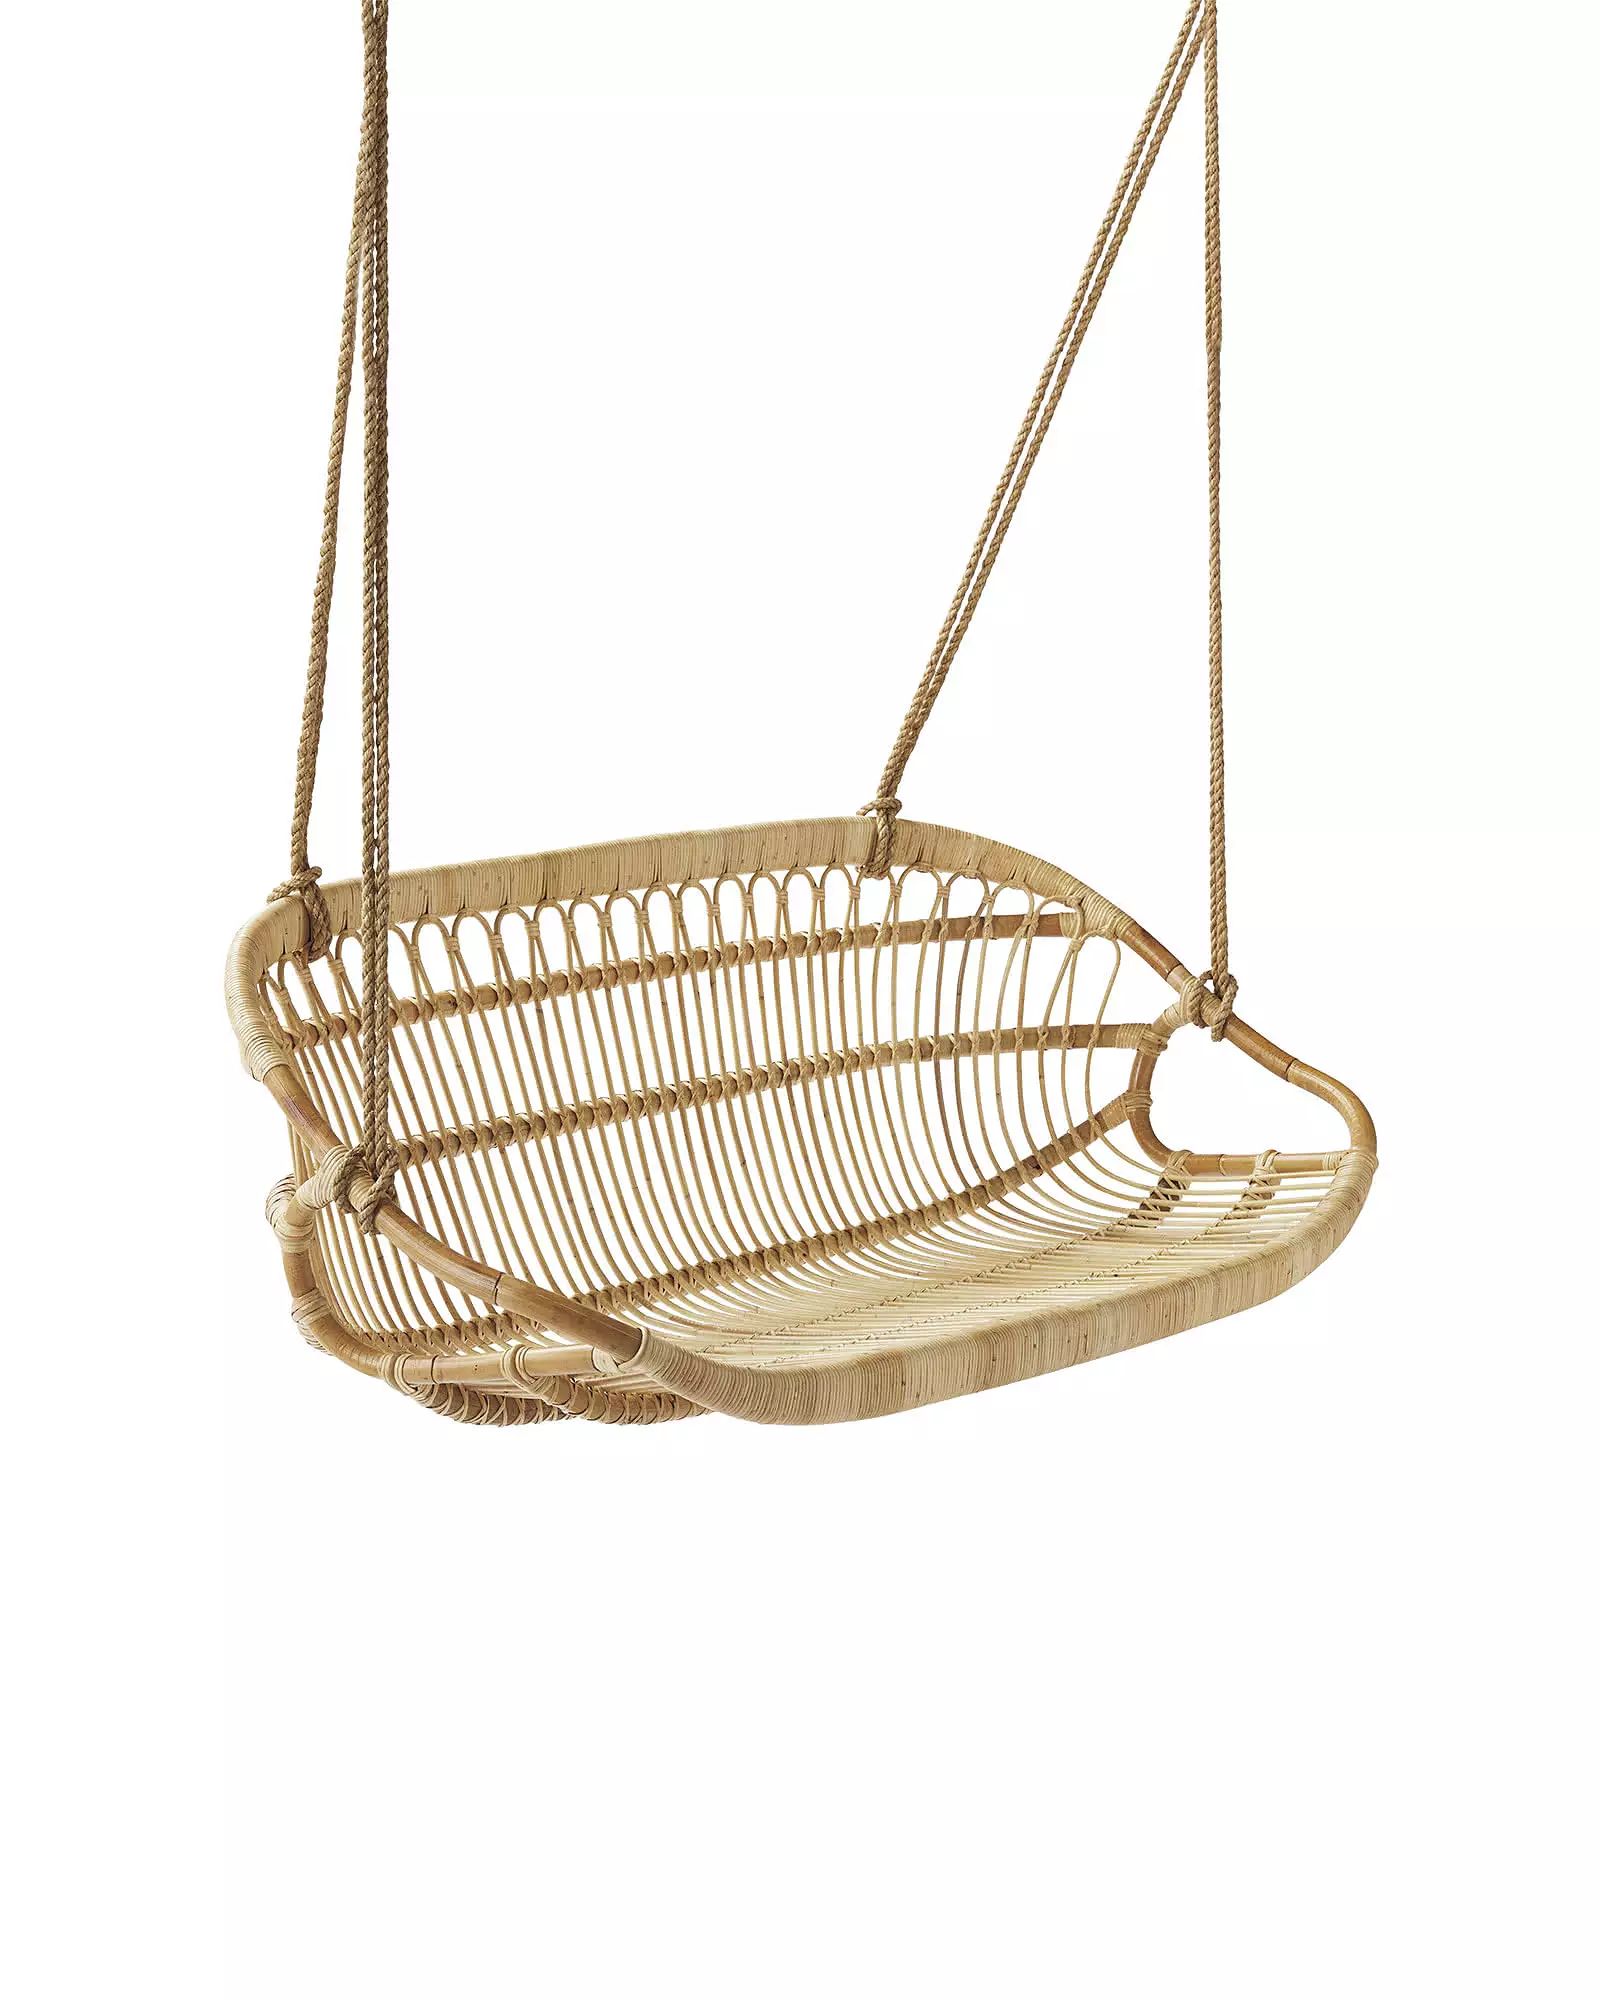 Hanging Rattan Bench | Serena and Lily